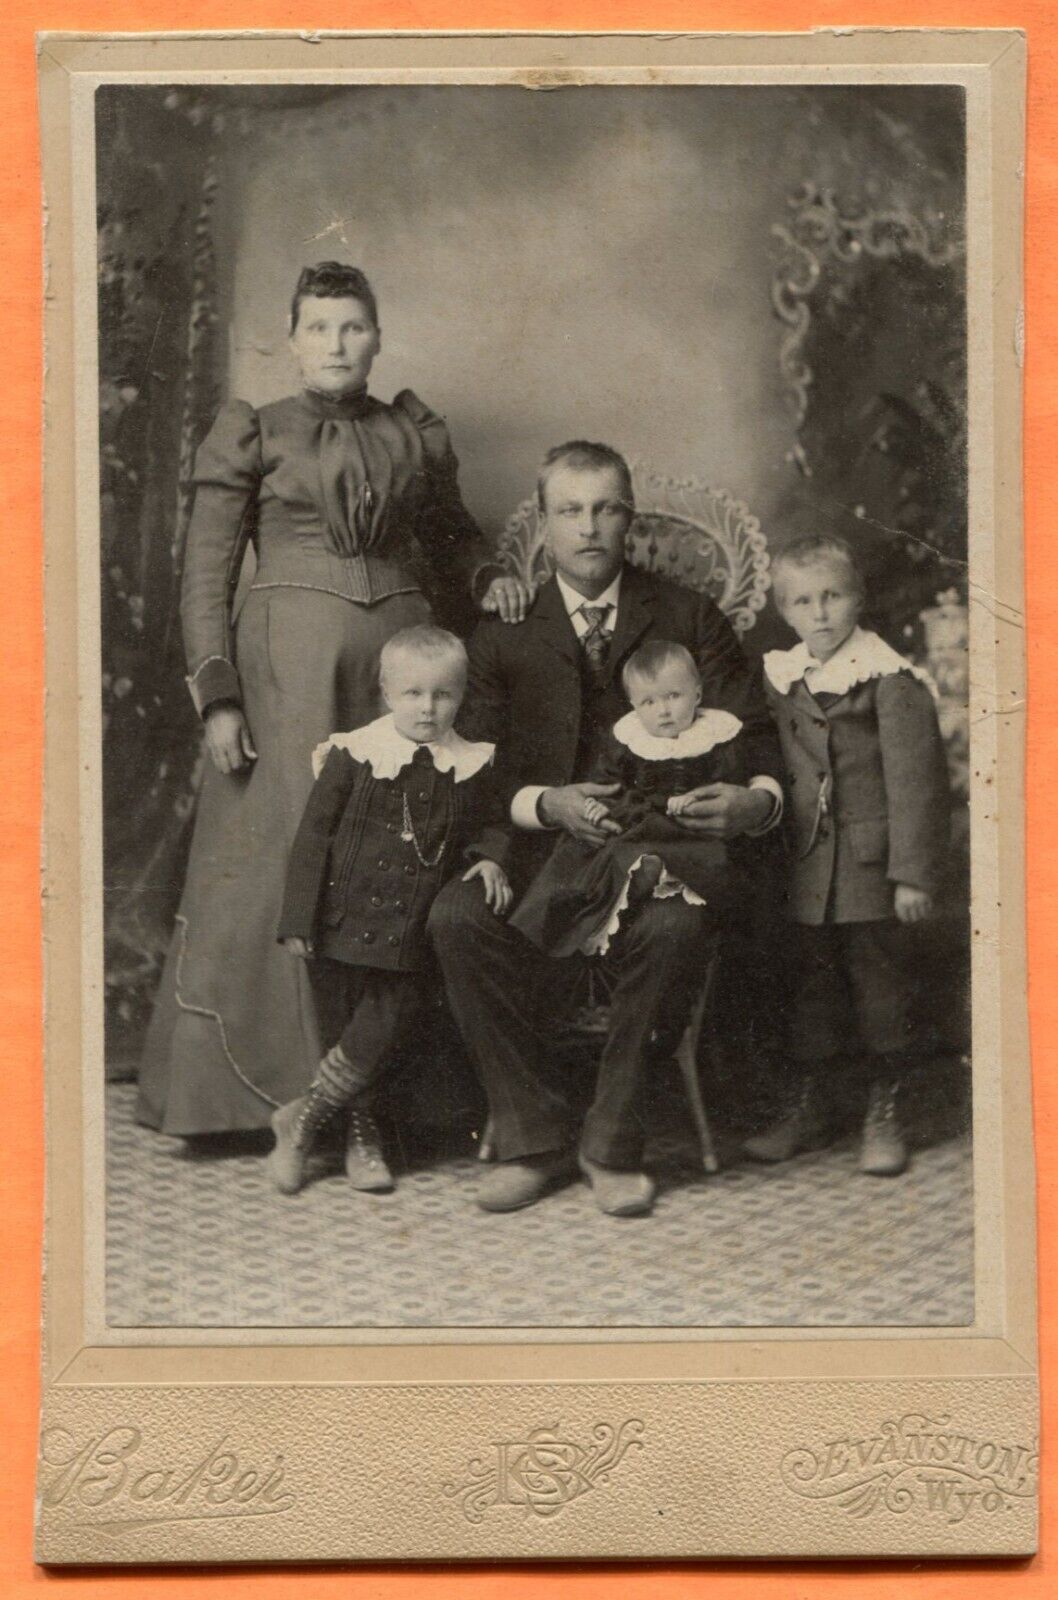 Evanston WY Portrait of a Family by Baker, circa 1900s